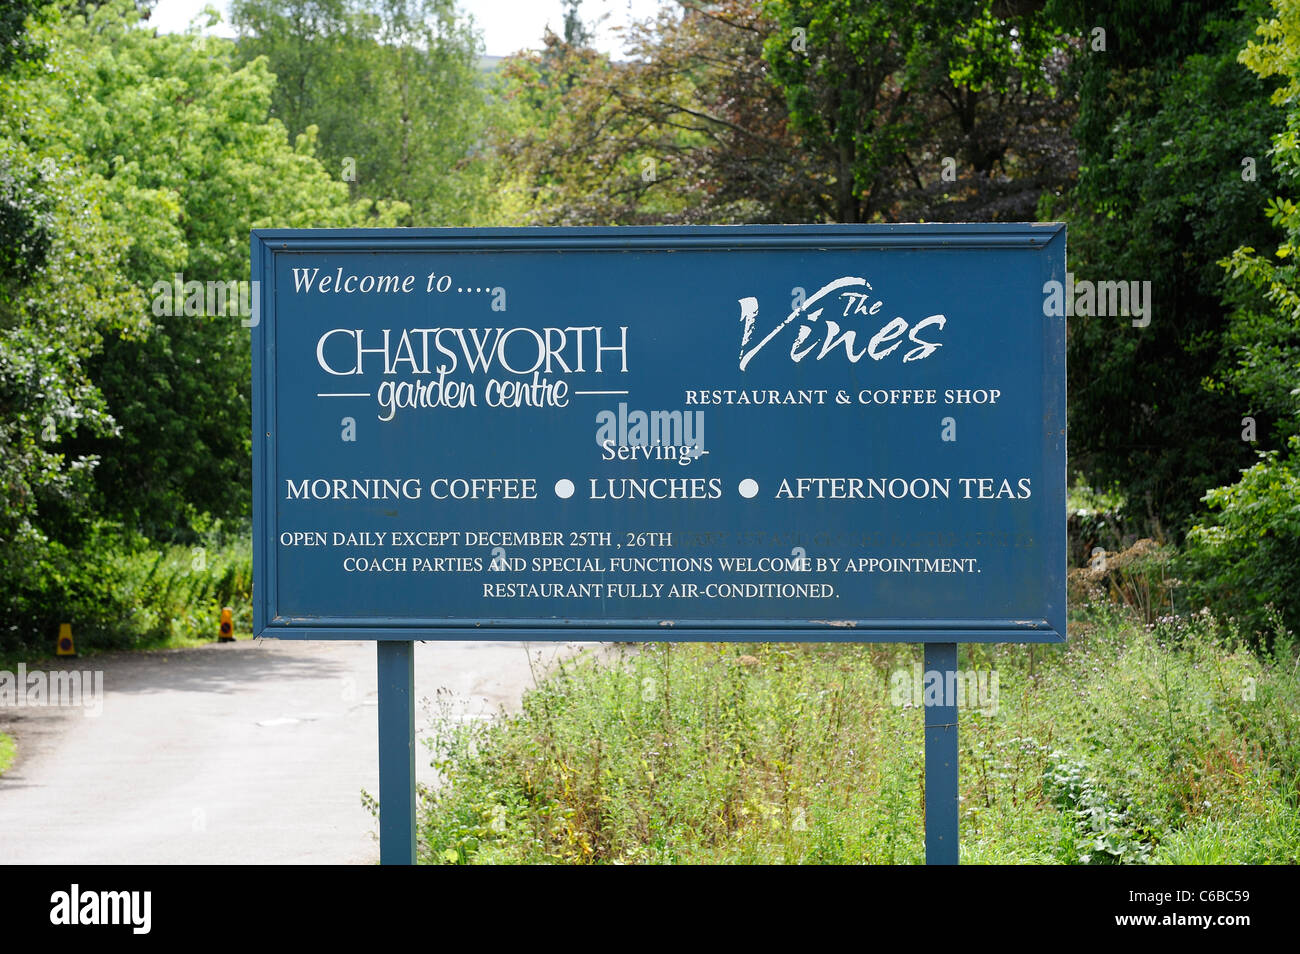 chatsworth garden centre sign and the vines restaurant and coffee shop derbyshire england uk Stock Photo